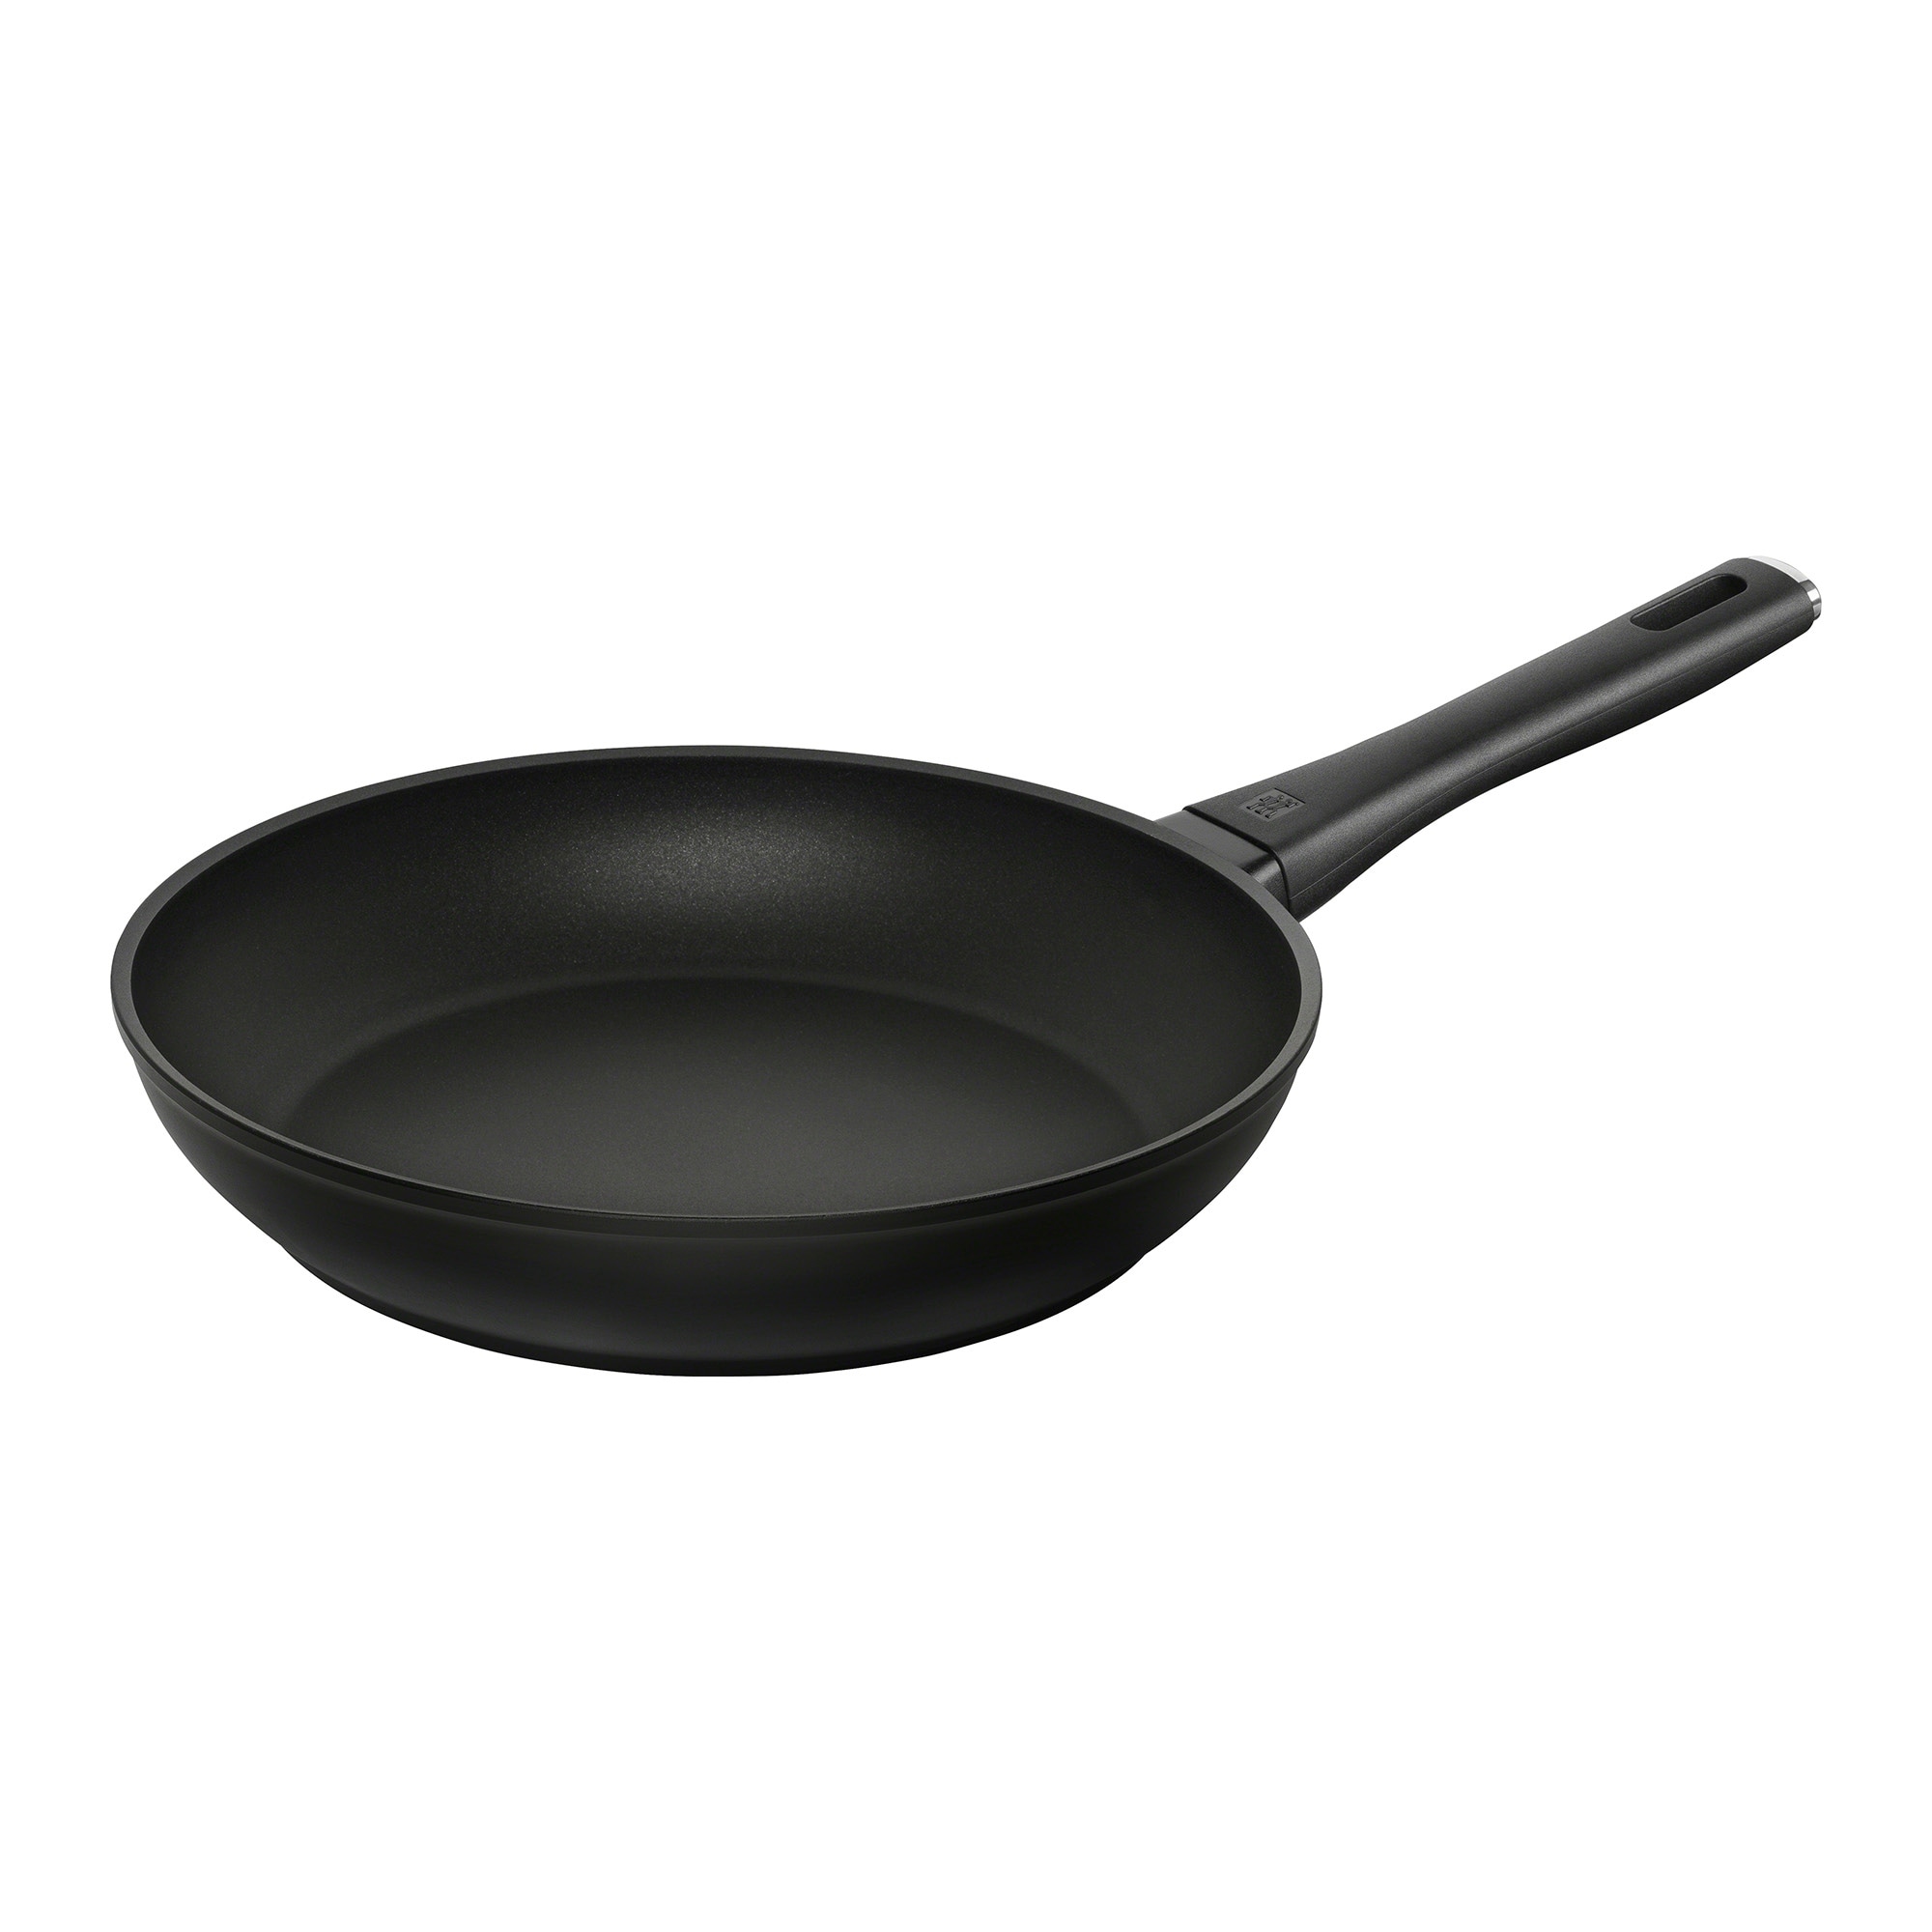 ZWILLING Madura Plus Forged 4-qt Aluminum Nonstick Saute Pan with